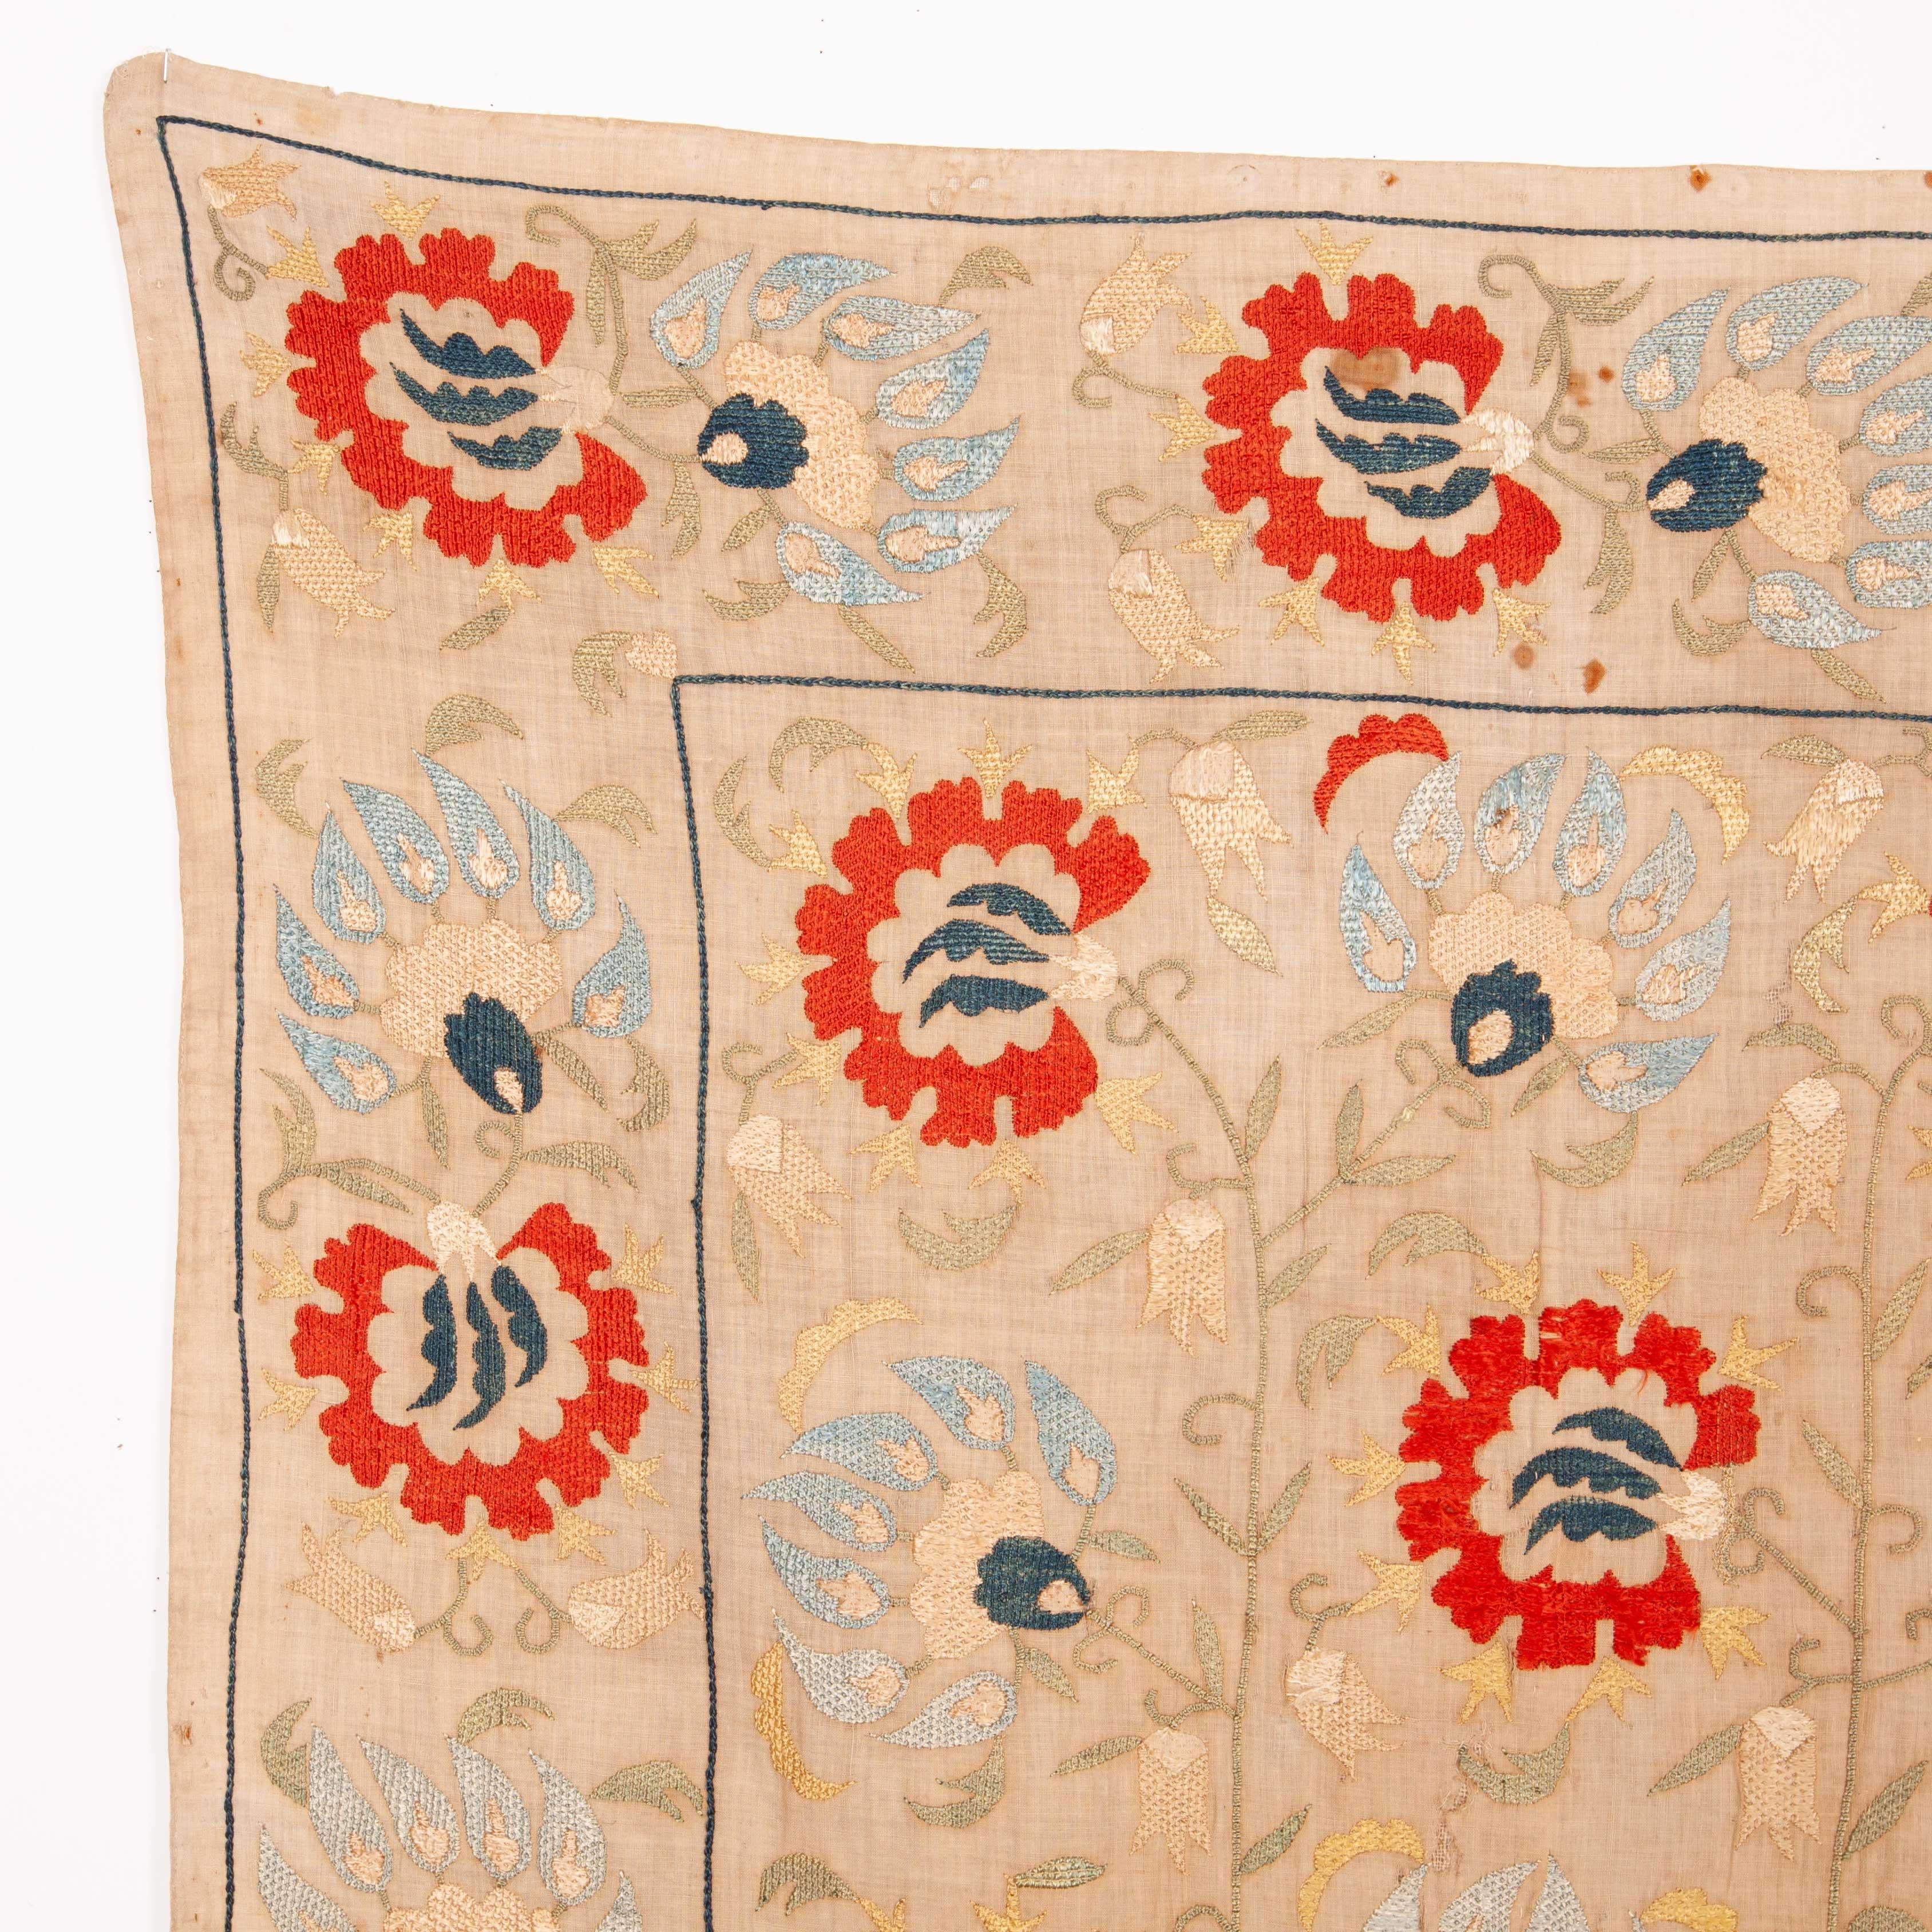 Bokhces are usually used to wrap clothing in. This is an early 19th century. Example to ottoman embroideries.
   